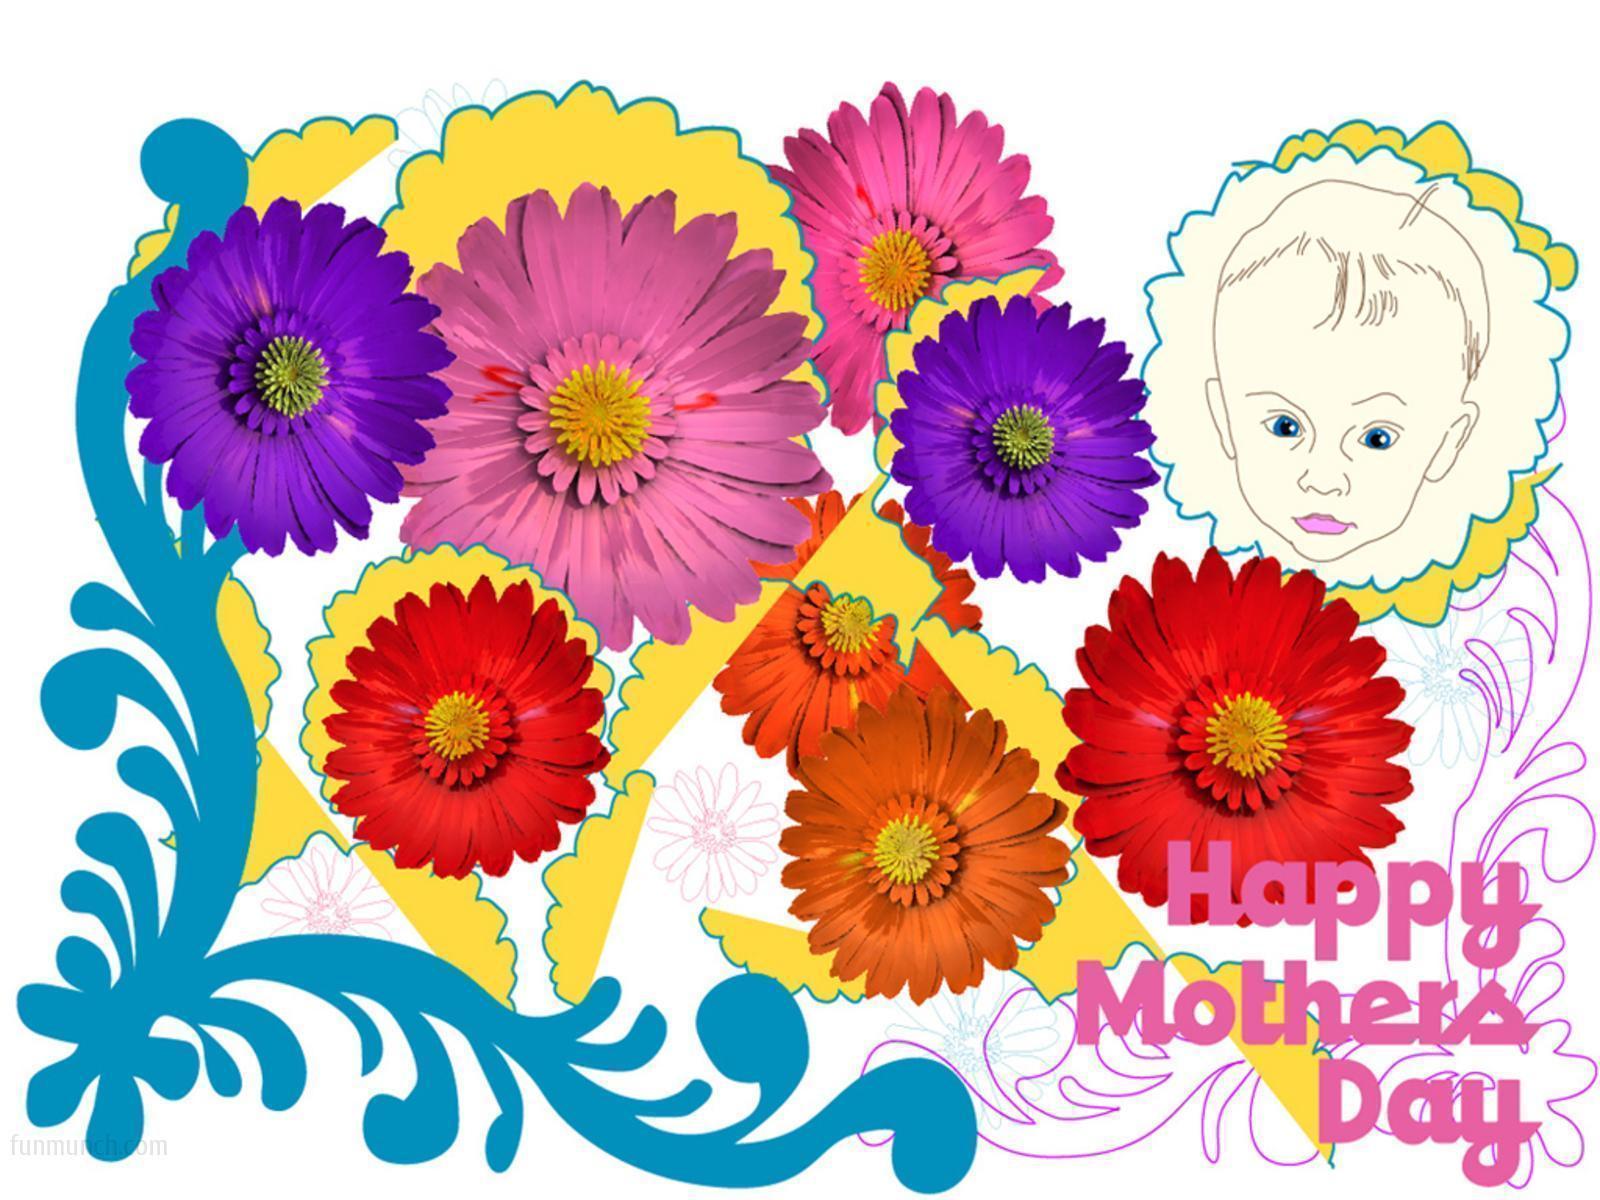 Mothers Day Background 1 HD Wallpaper. aduphoto